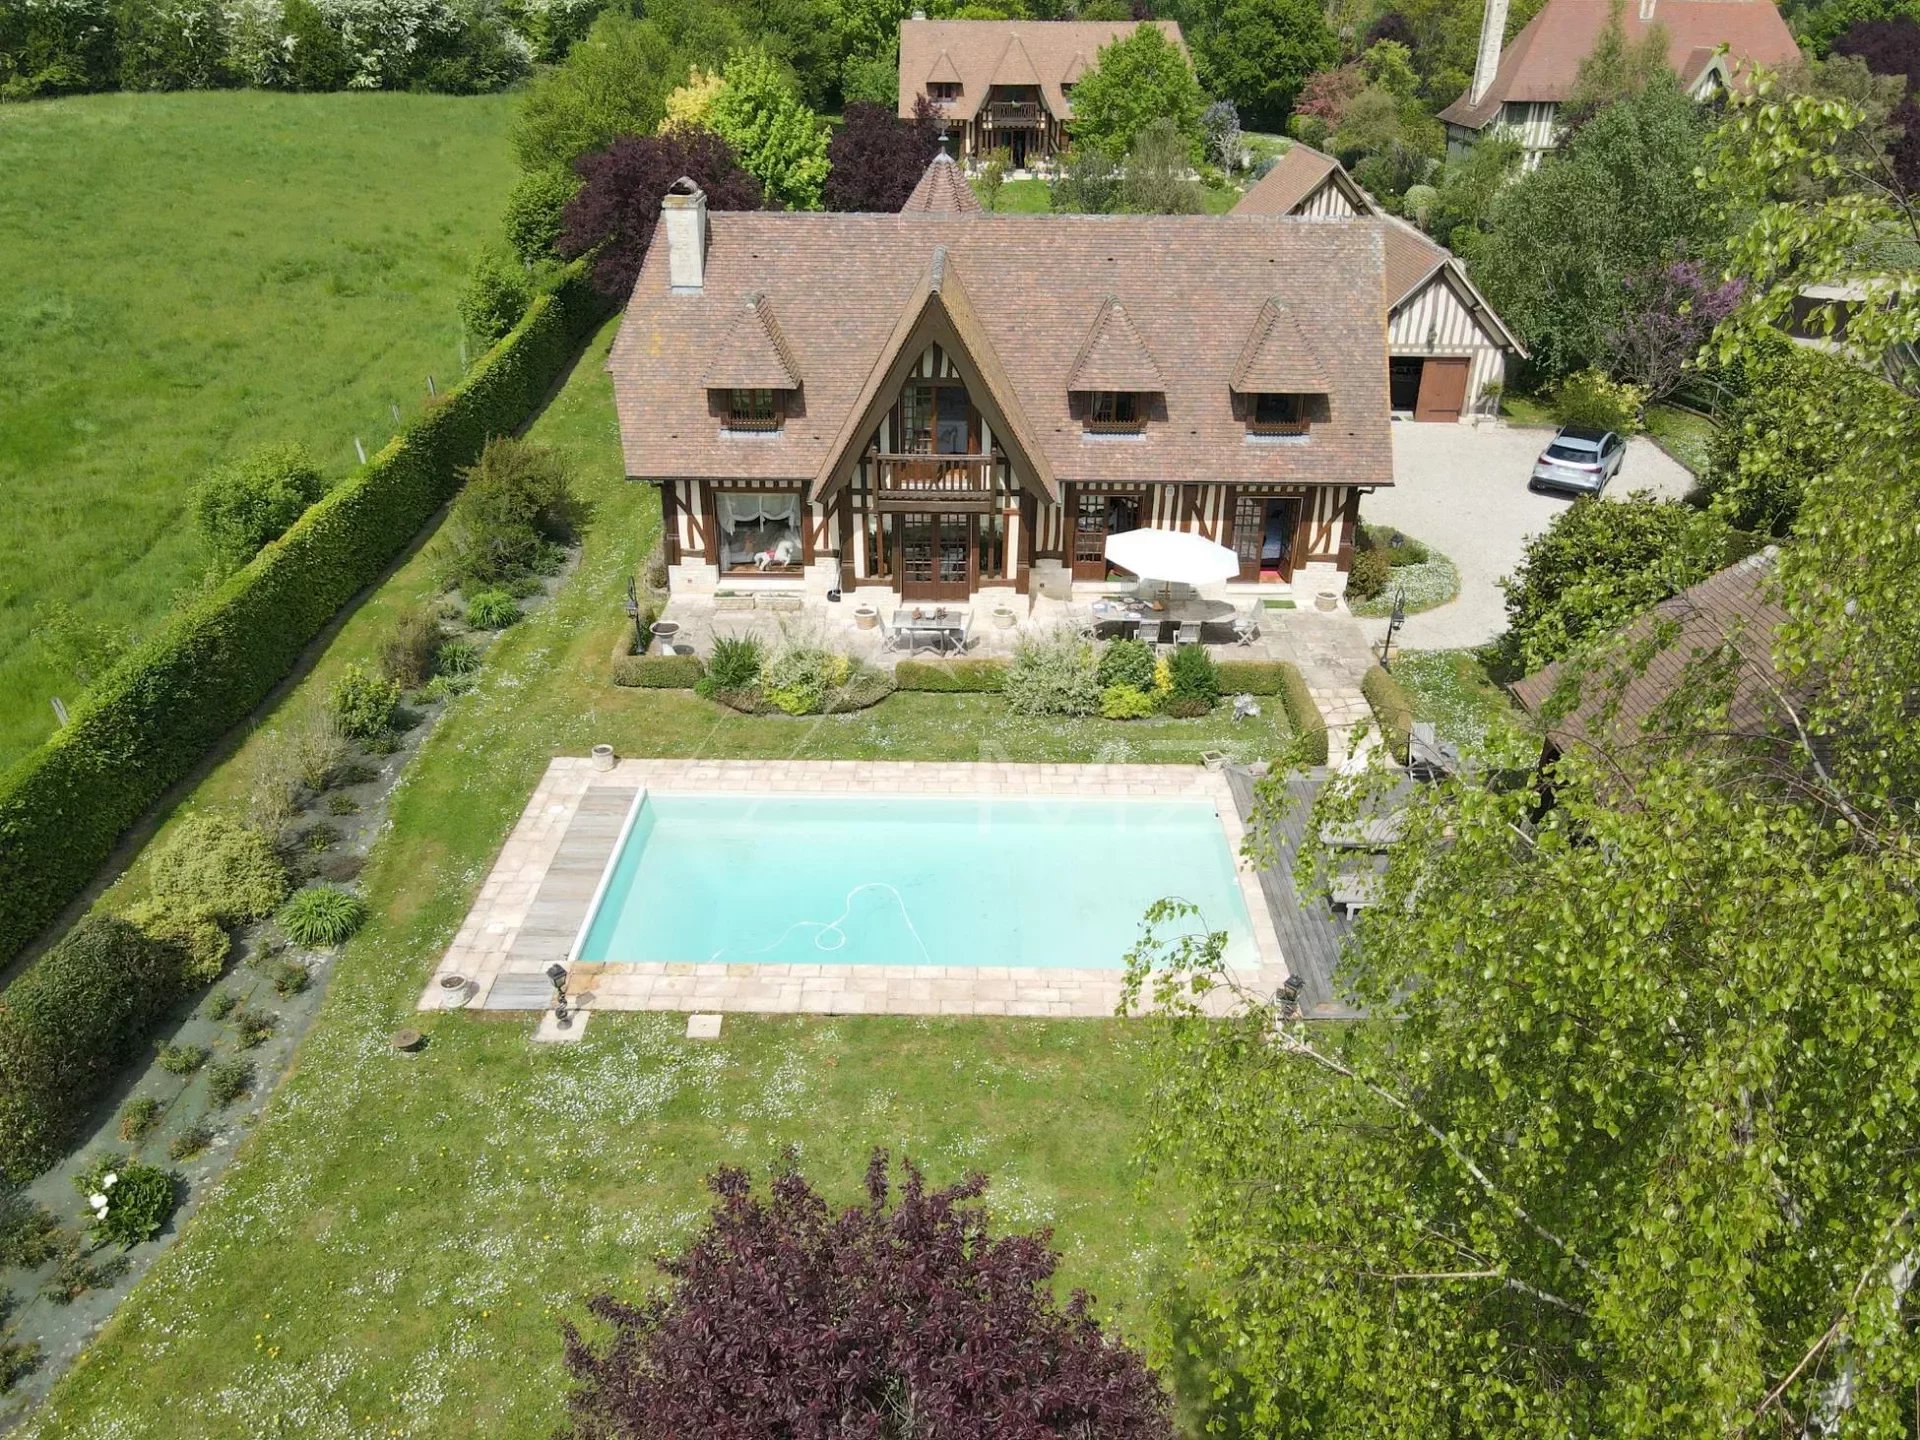 LEBAS HOUSE WITH SWIMMING POOL IN THE HEART OF A VILLAGE